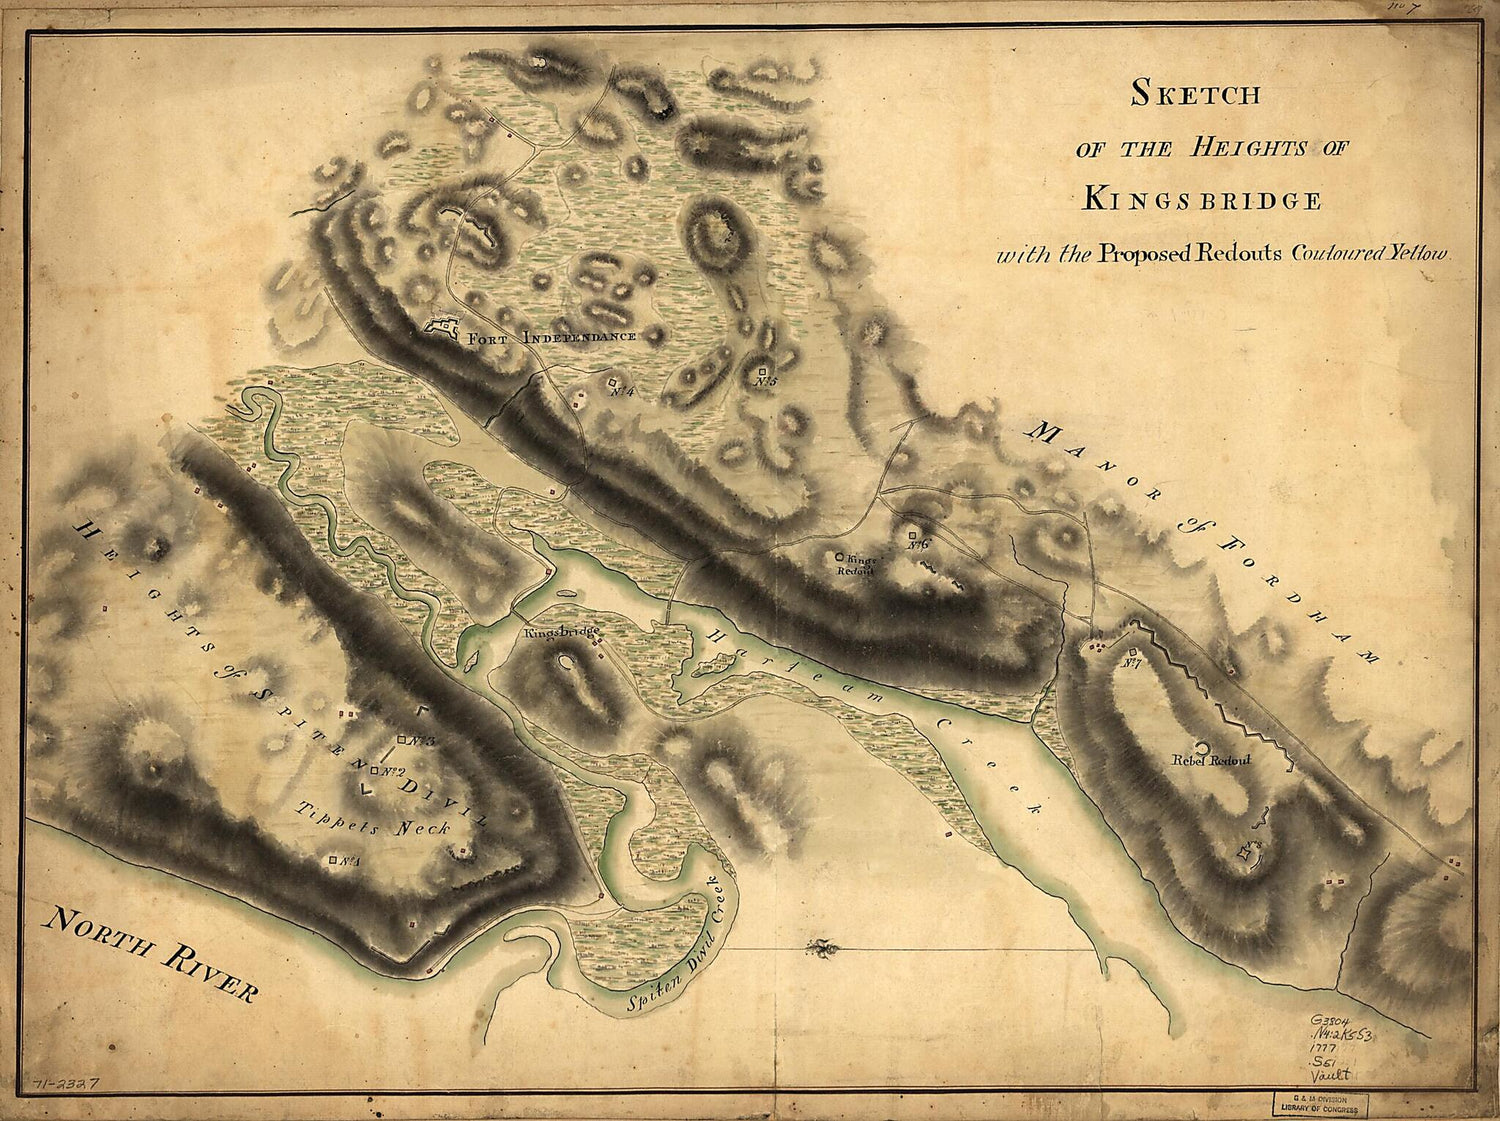 This old map of Sketch of the Heights of Kingsbridge, With the Proposed Redouts Couloured Yellow from 1777 was created by John Montrésor in 1777